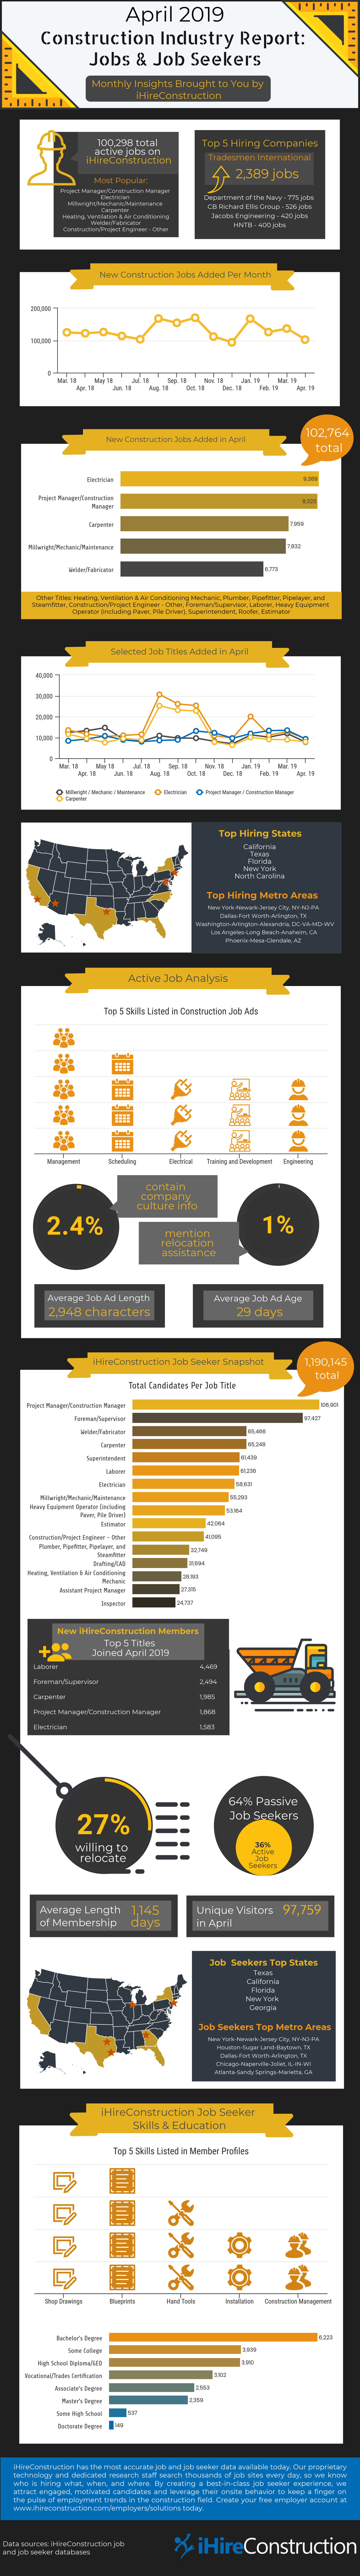 iHireConstruction's April 2019 industry report on construction jobs and job seekers. Infographic.